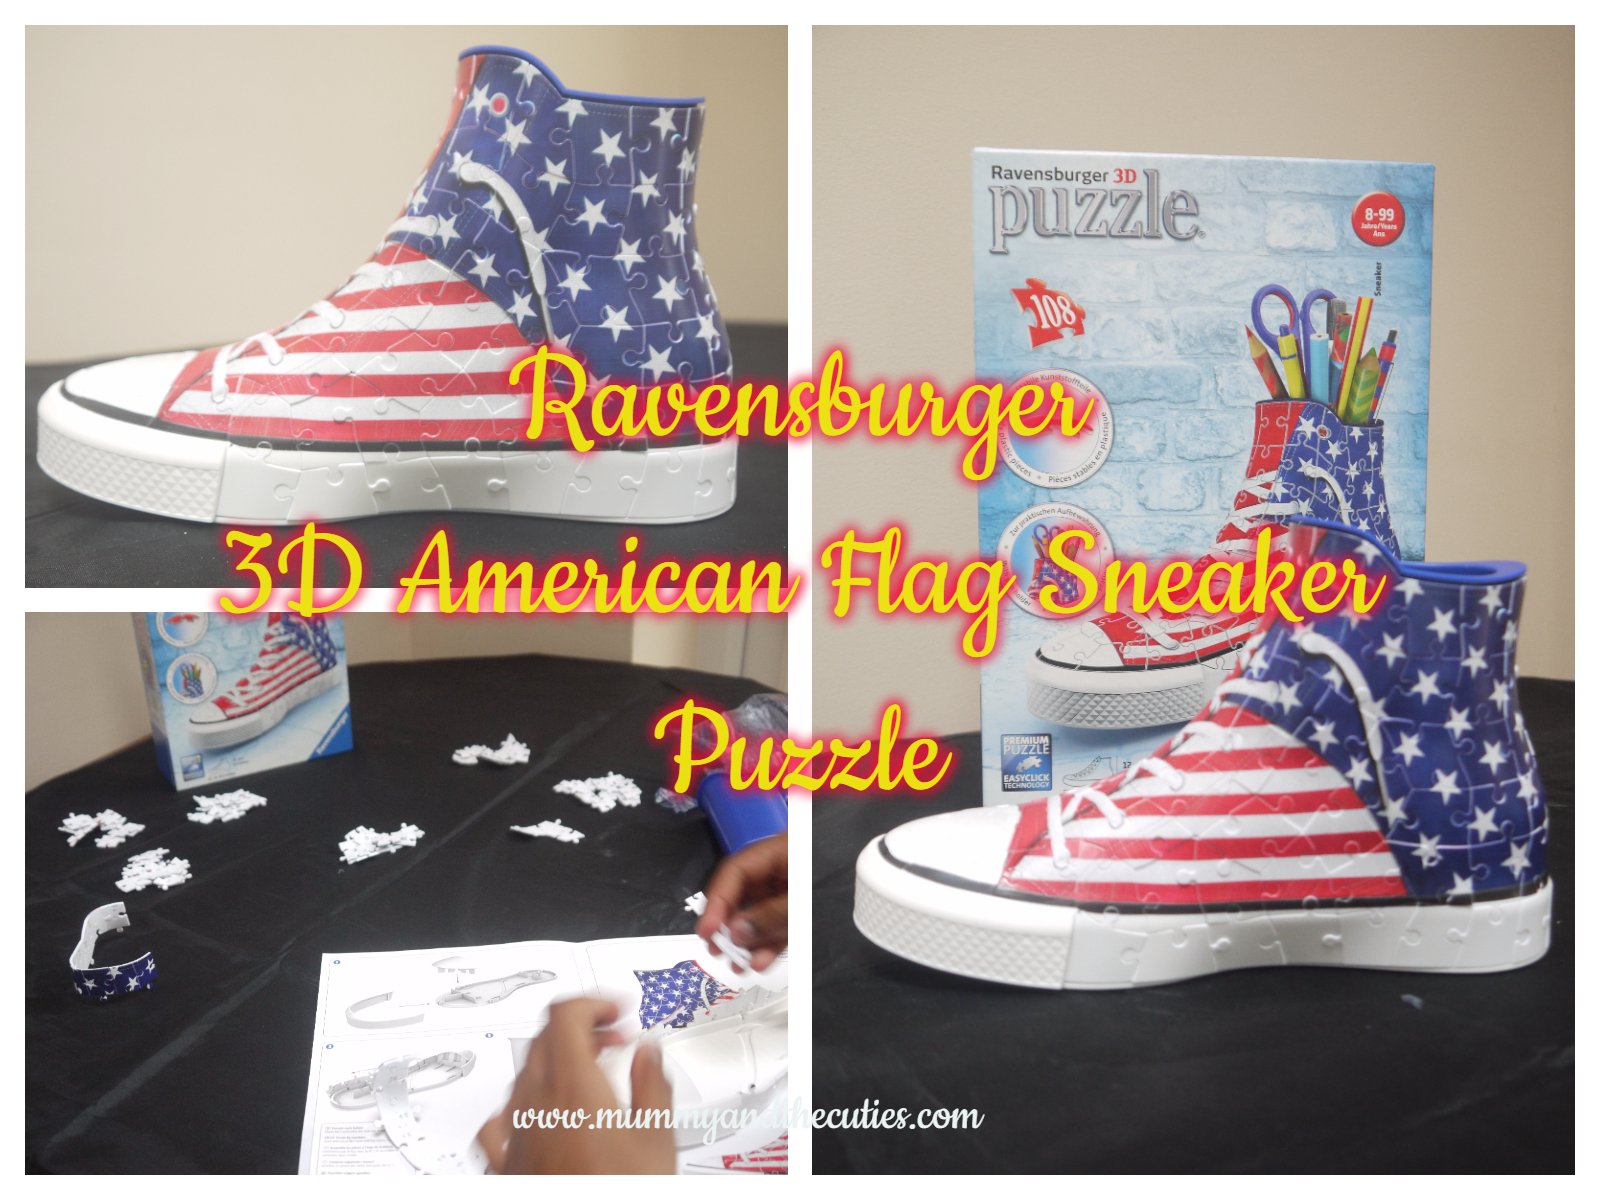 Ravensburger 3D American Flag Sneaker Puzzle – Review